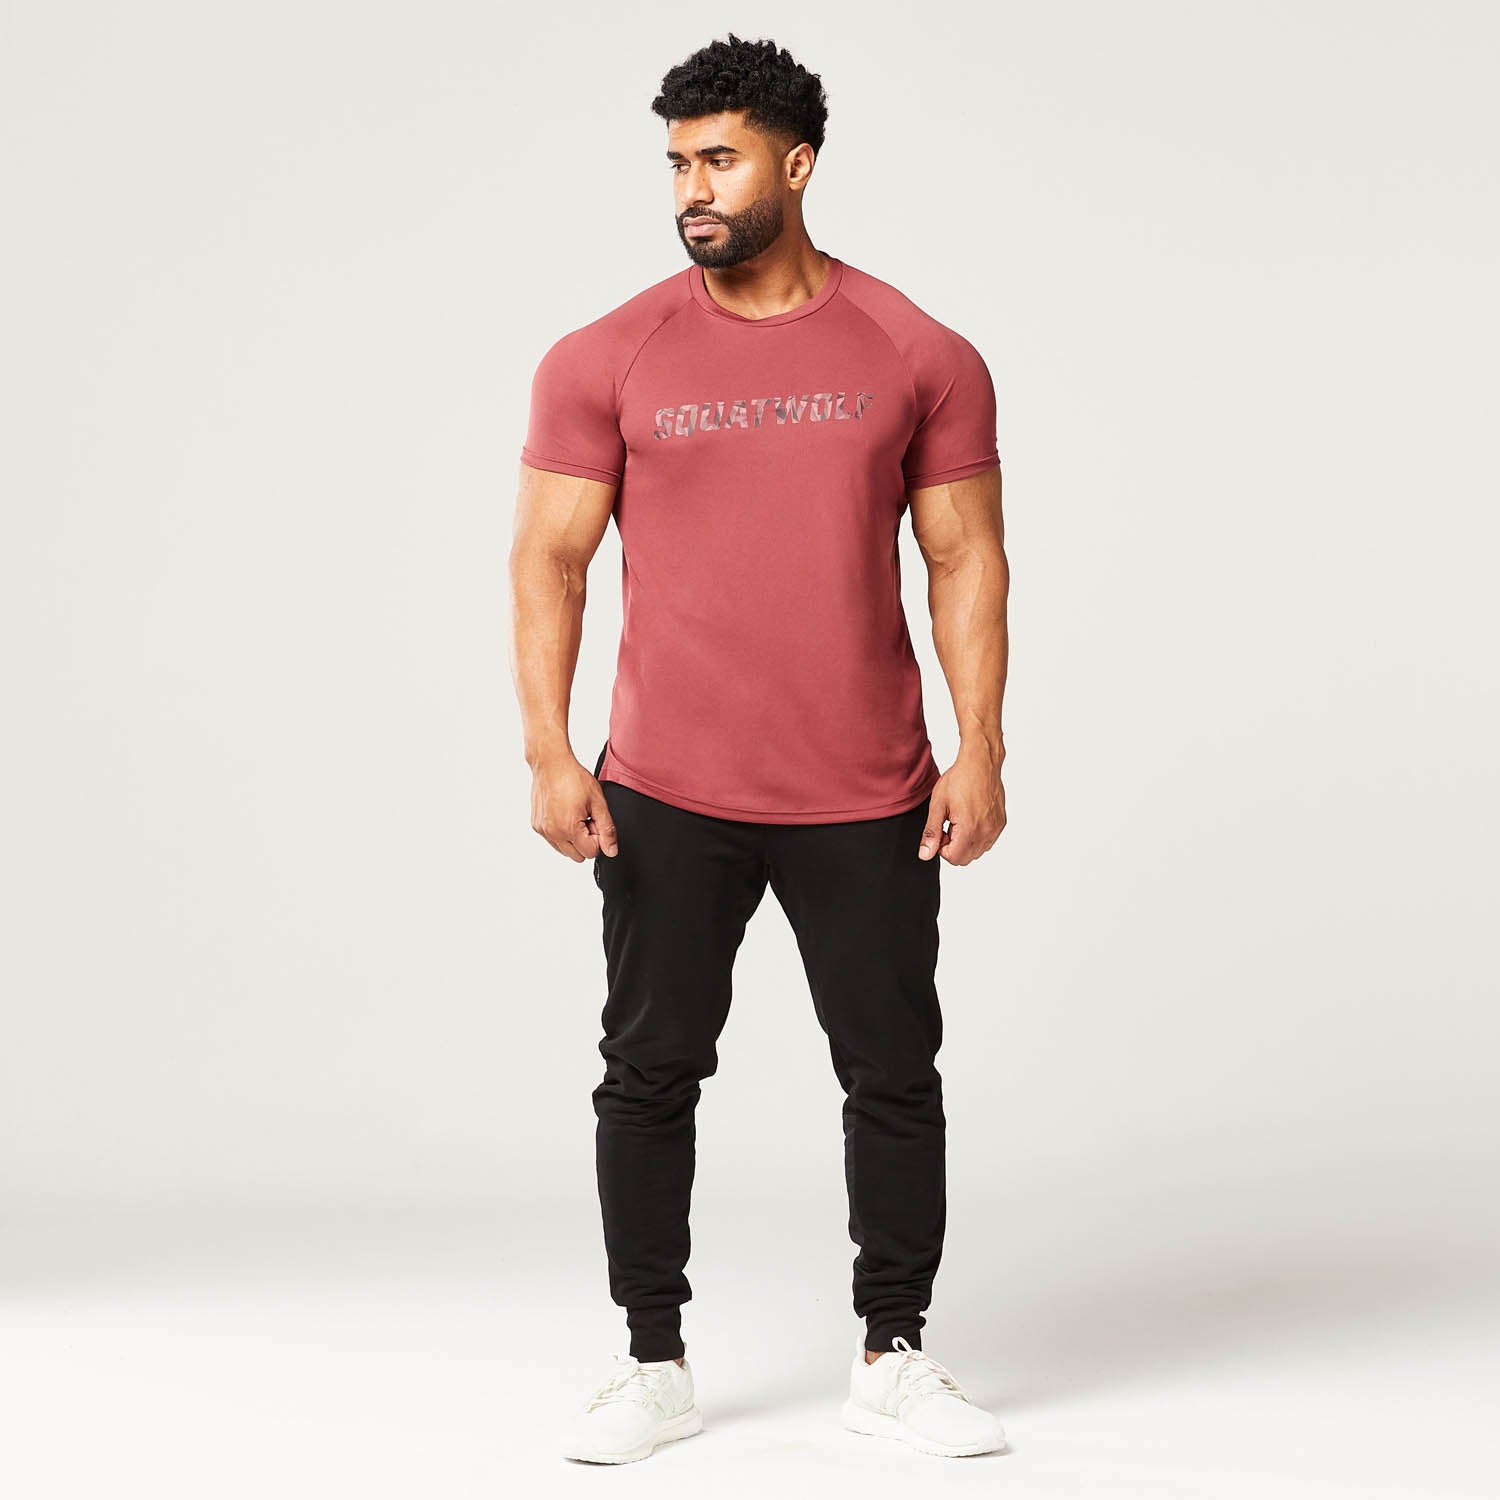 squatwolf-gym-wear-code-muscle-tee-red-workout-shirts-for-men